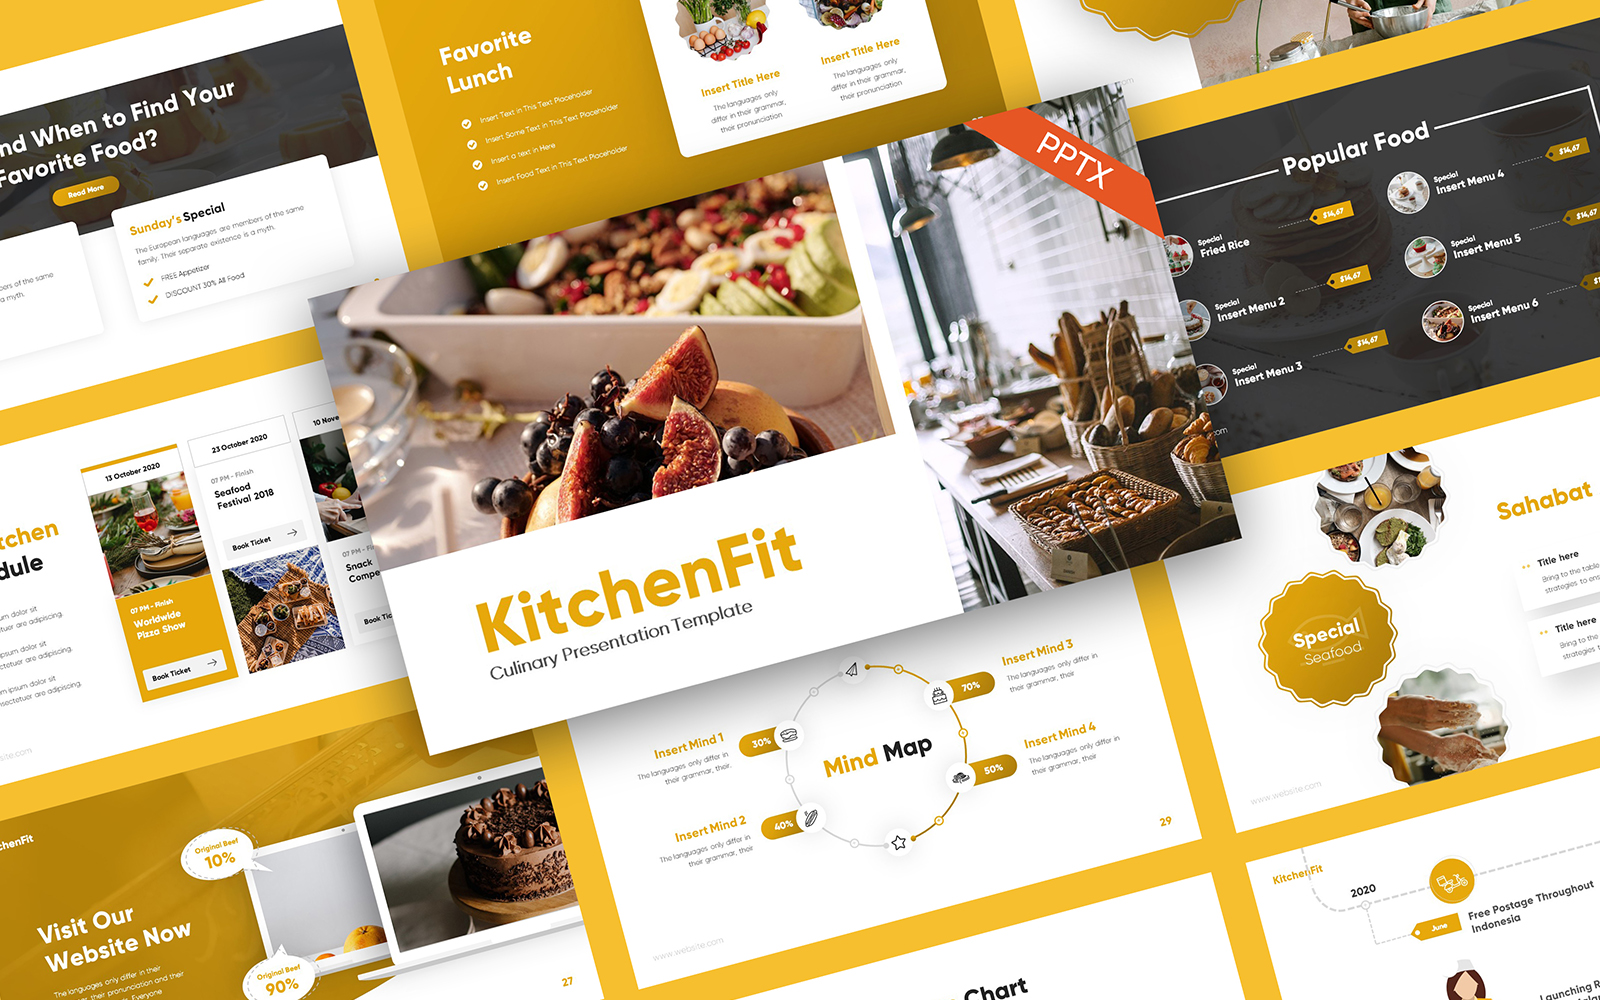 KitchenFit Culinary PowerPoint Template